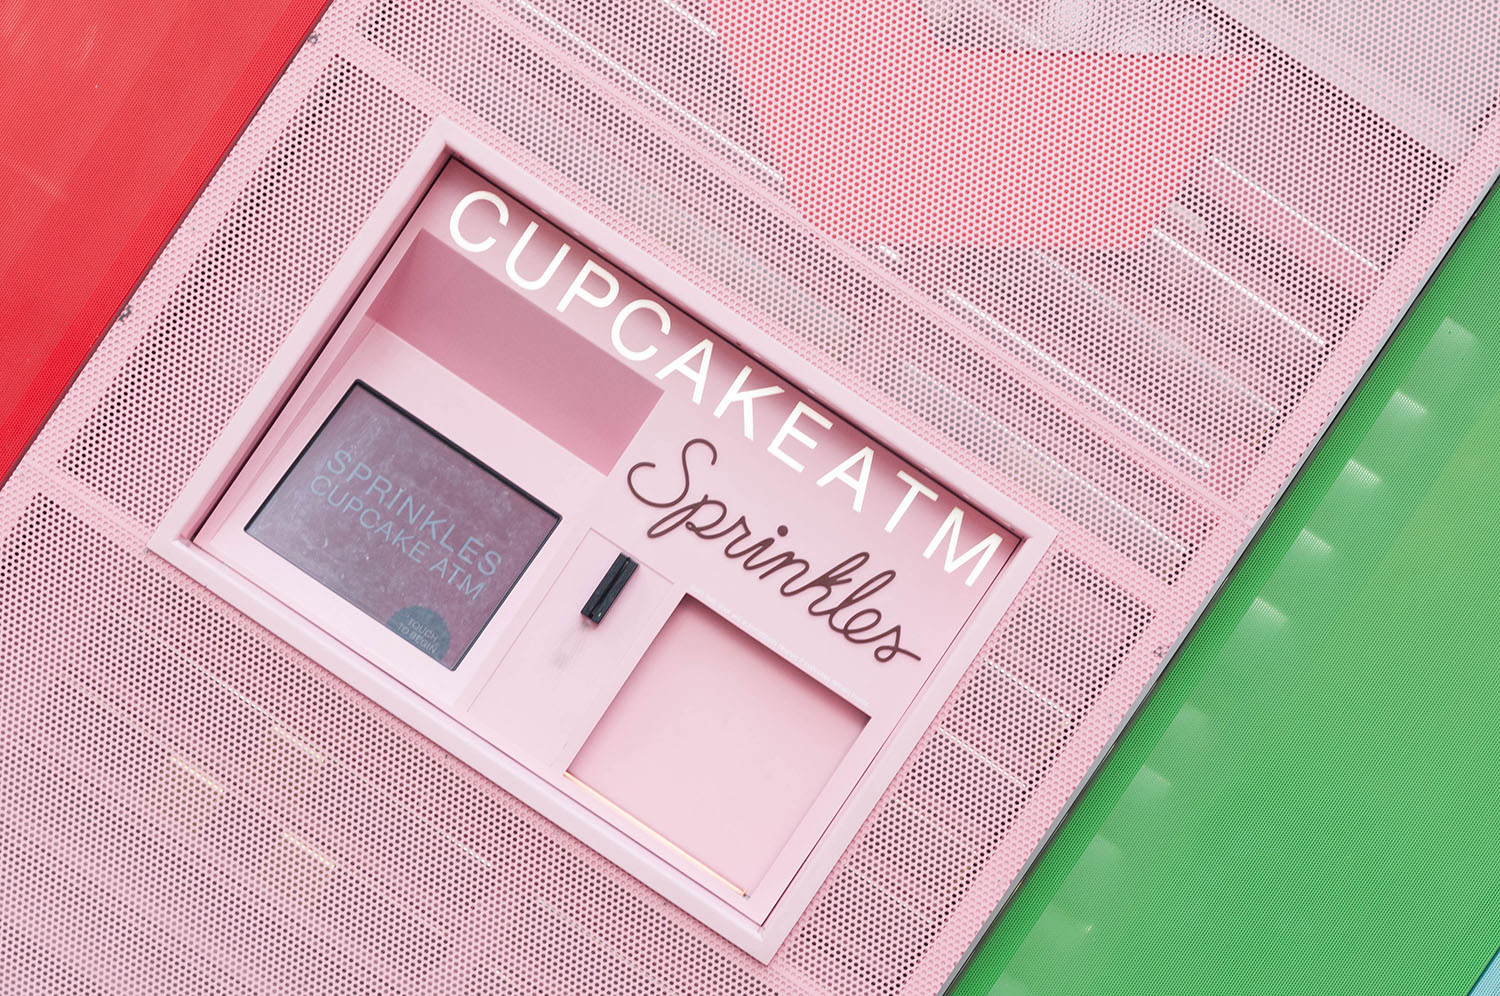 The Sprinkes cupcake ATM on the Linq Promenade in Las Vegas, photographed by Canadian travel blogger Cee Fardoe of Coco & Vera